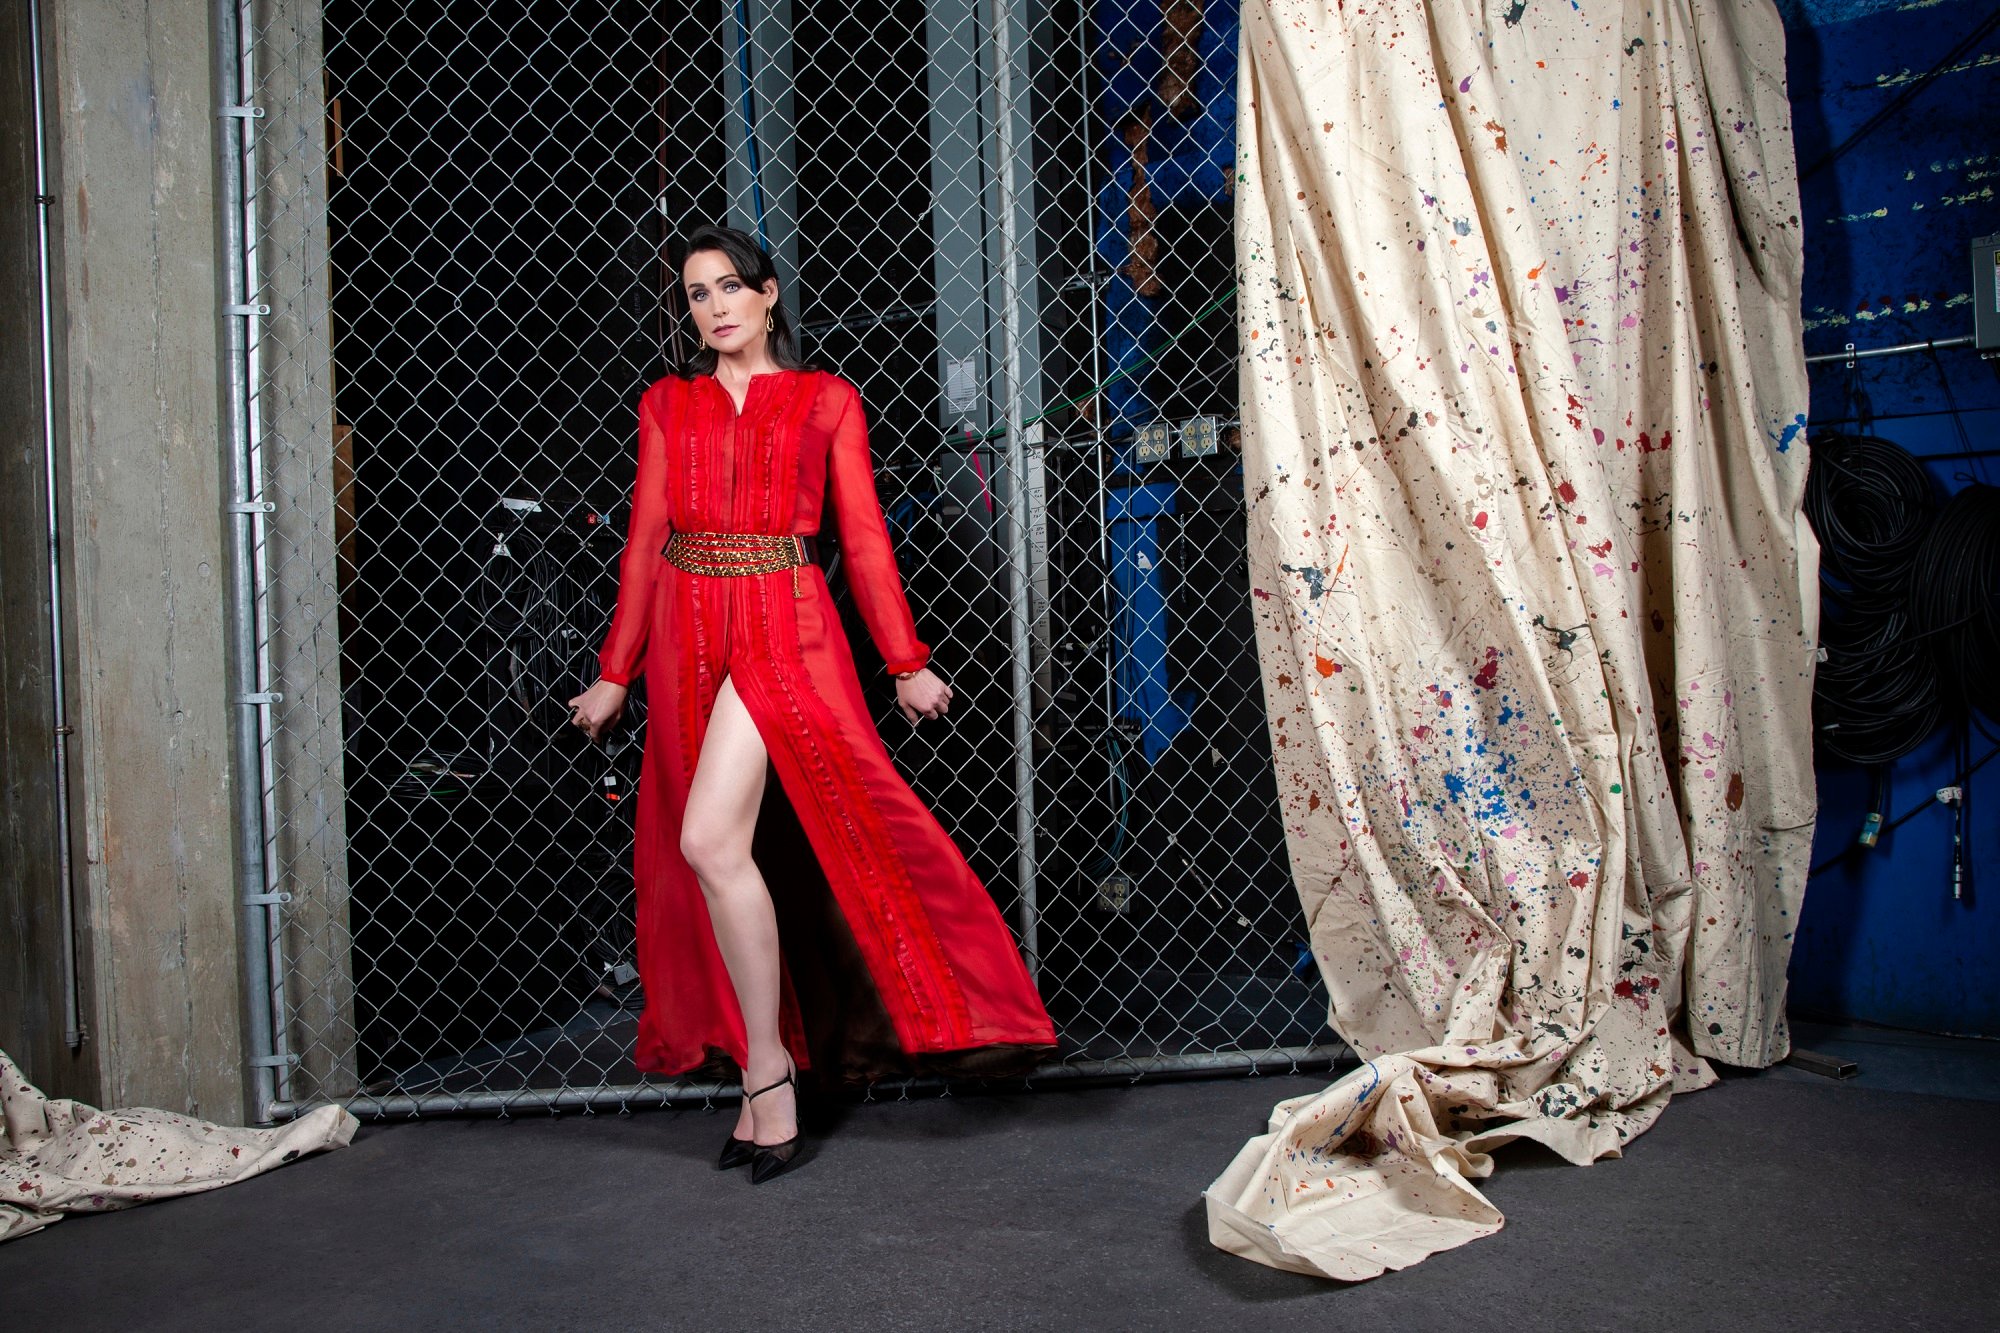 The Bold and the Beautiful spoilers focus on Rena Sofer's character of Quinn, pictured here in a red dress leaning up against a metal gate